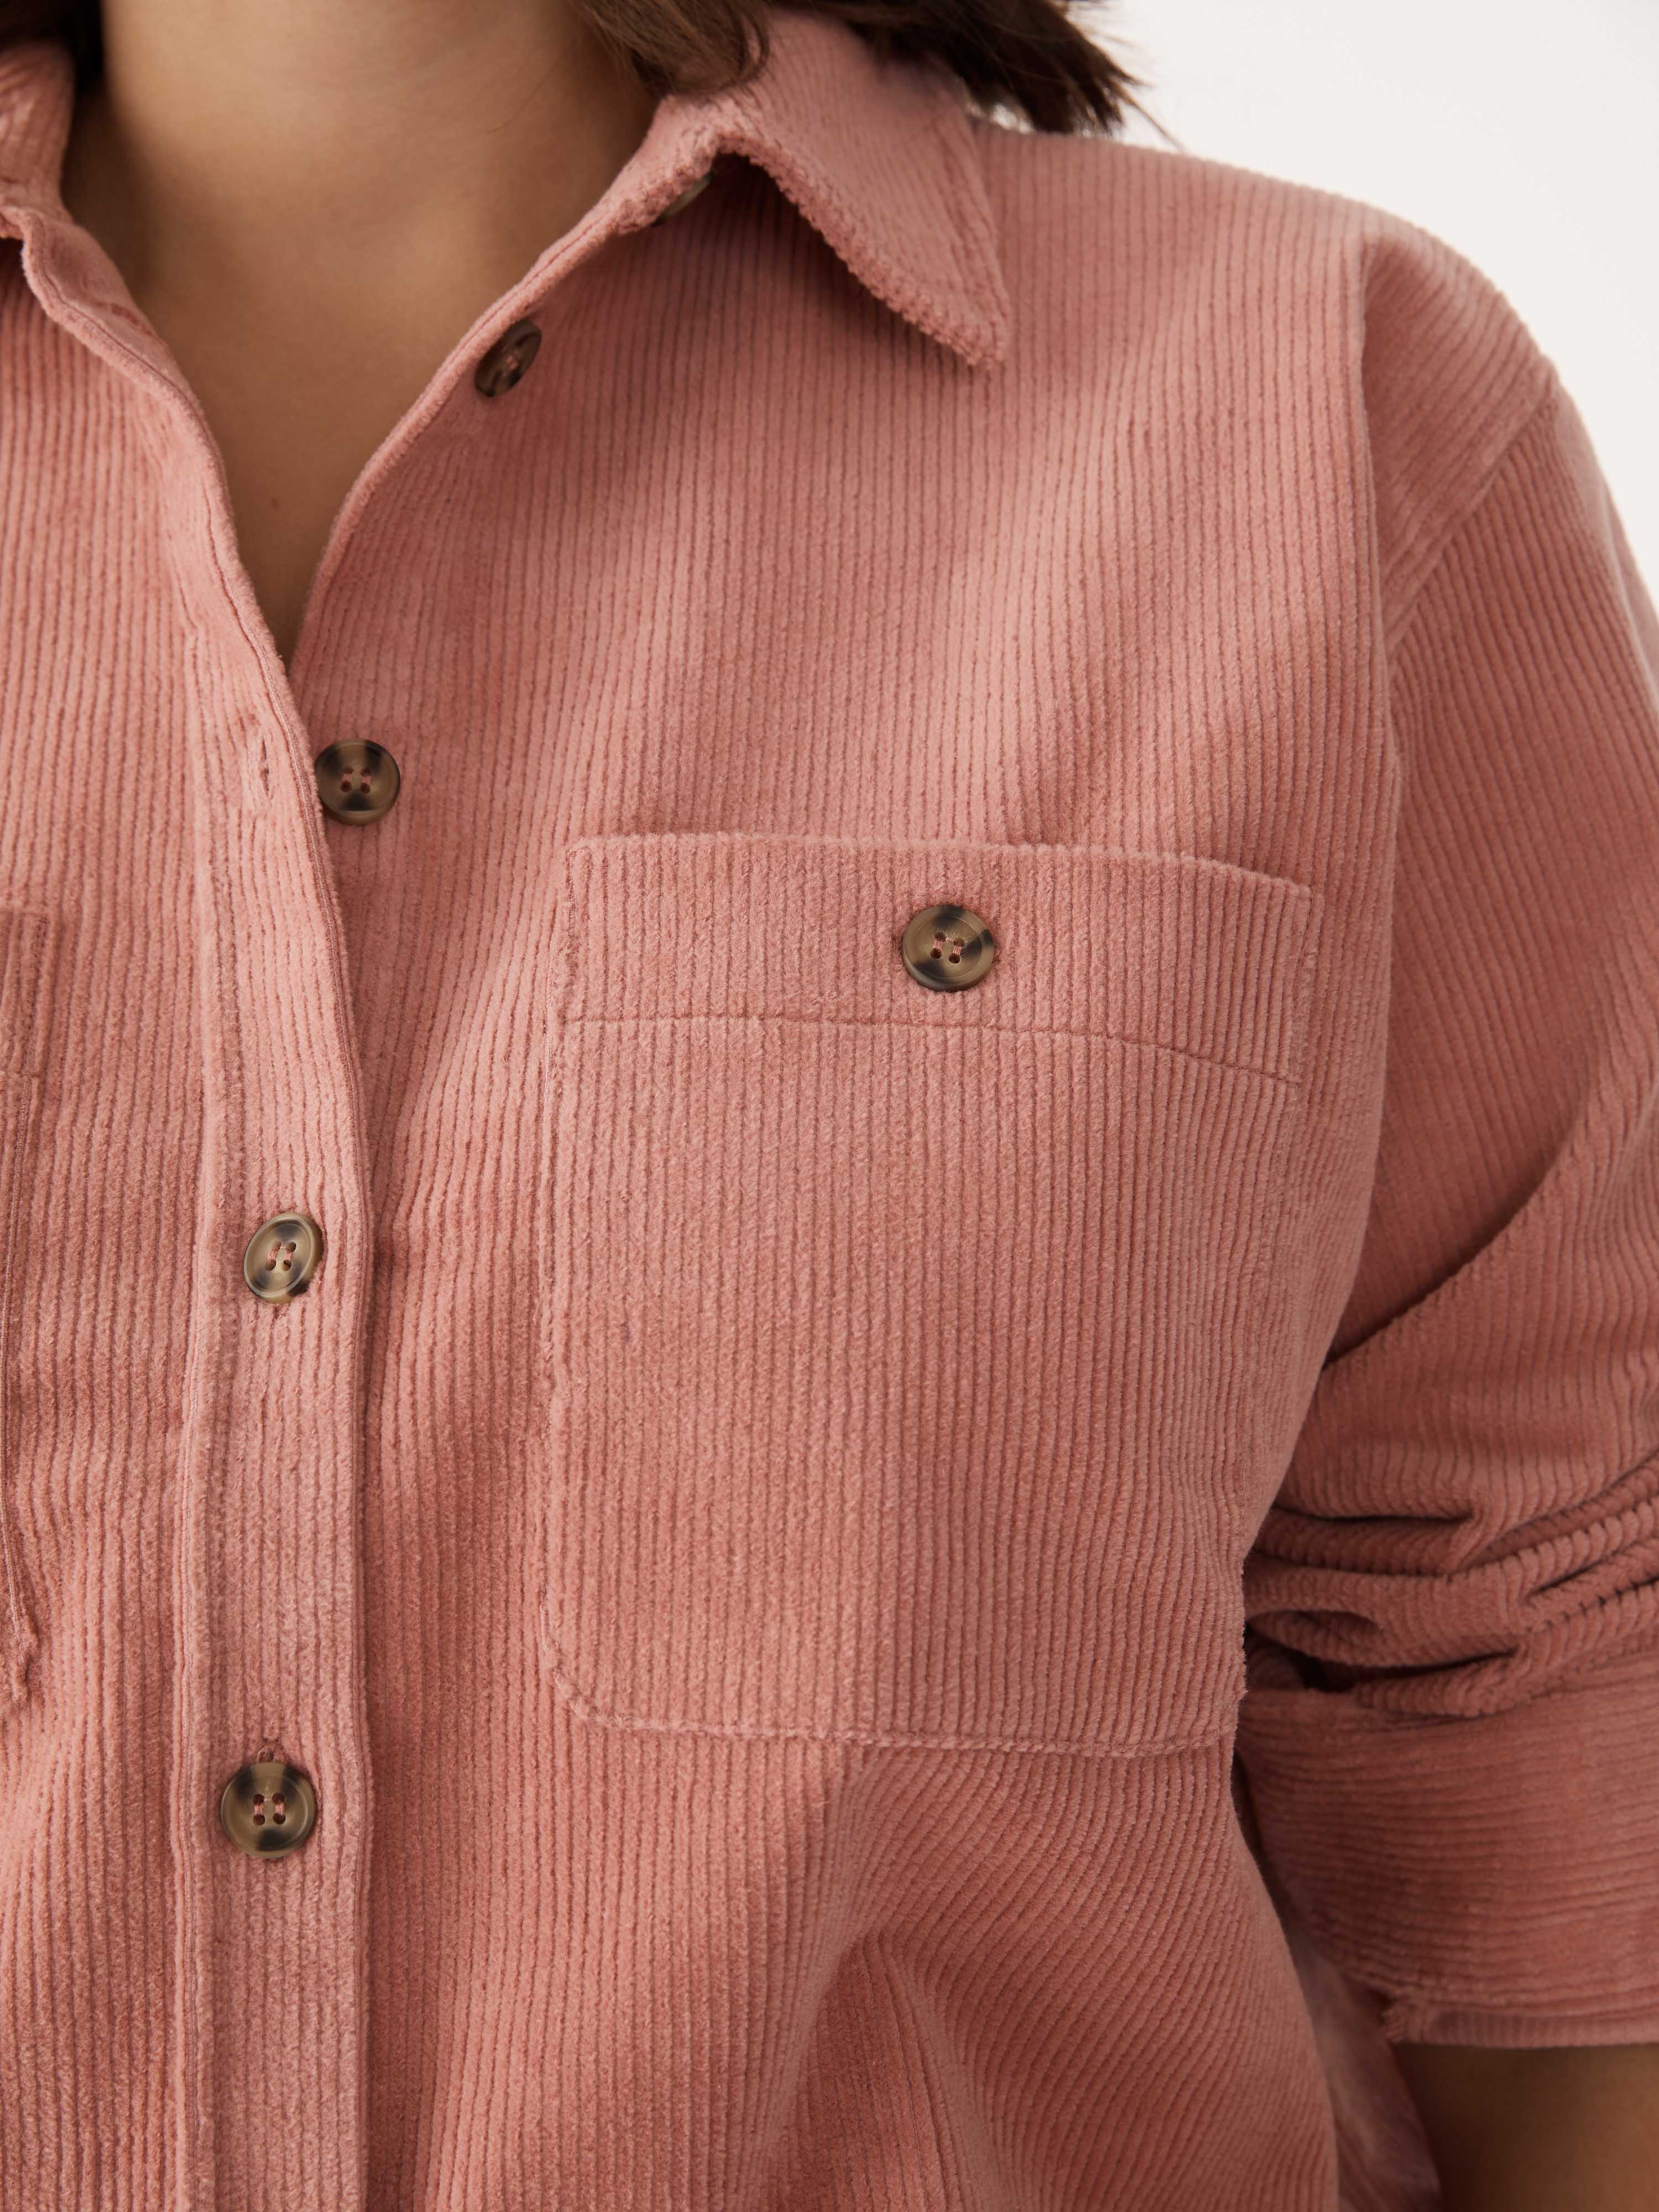 The Relaxed Cord Button Down Shirt